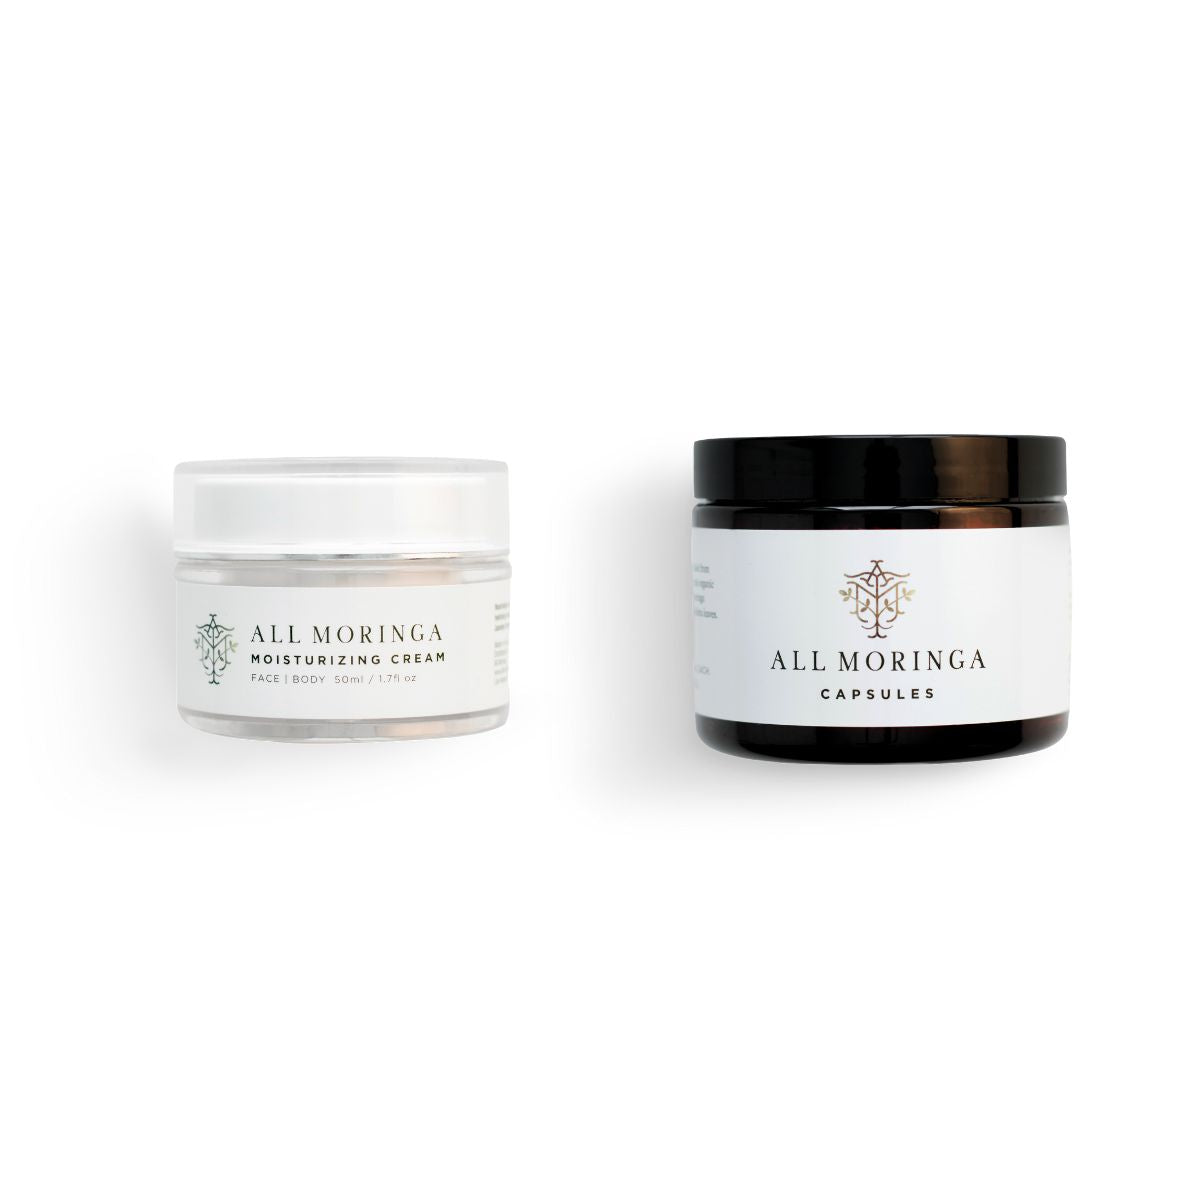 Holistic Beauty Routine: Moringa Face Cream and Capsules A picture of Moringa Face Cream and Capsules on a clean background, emphasizing their dual approach to skincare and wellness.